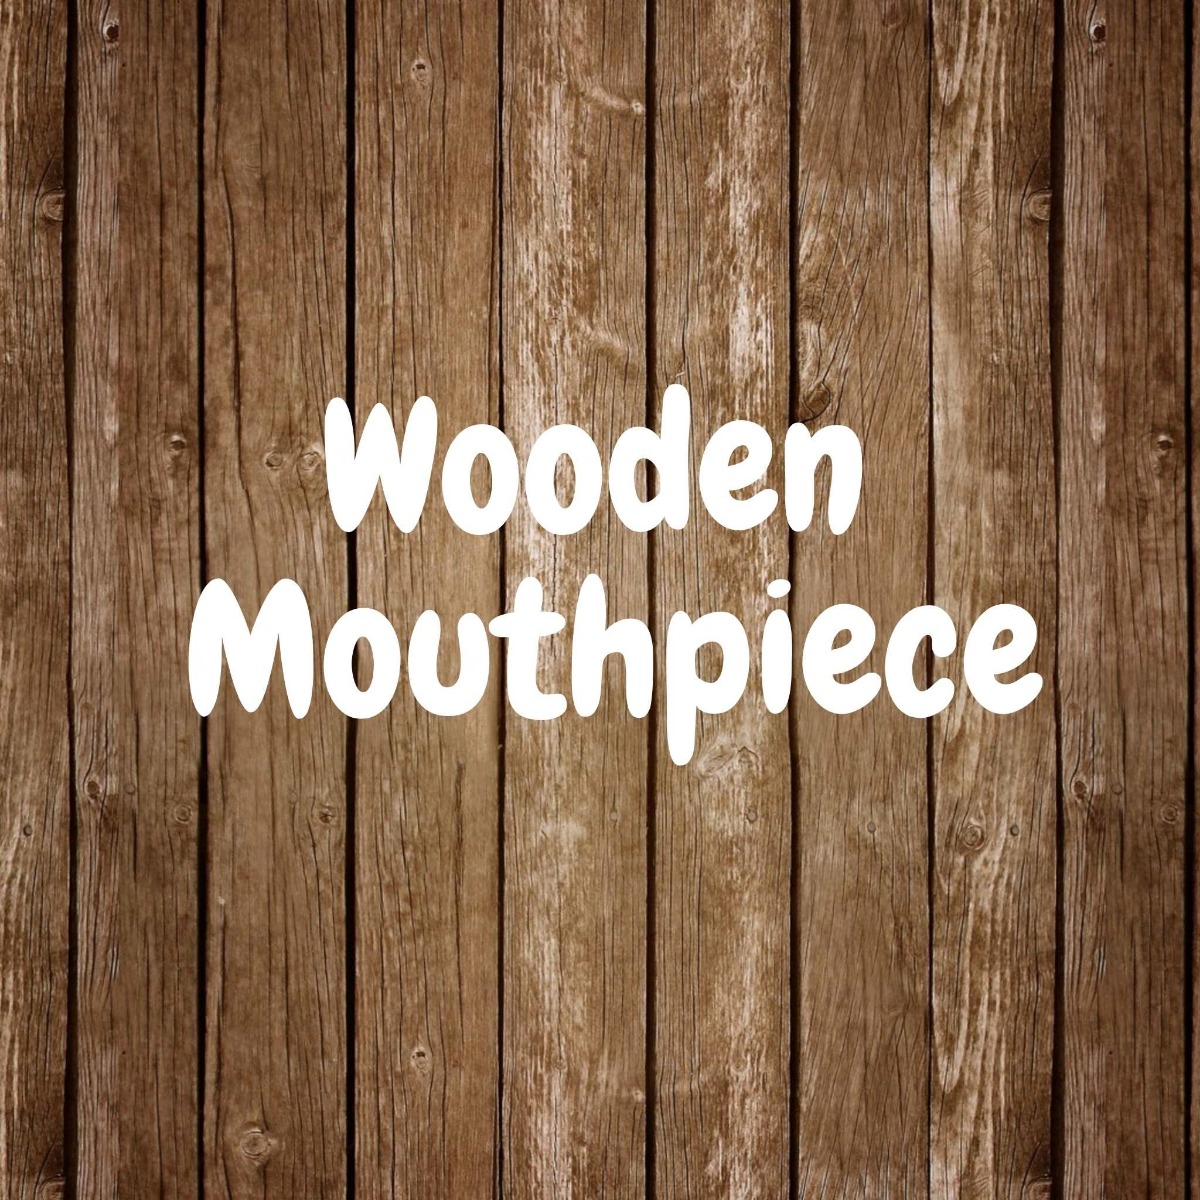 text saying wooden mouthpiece with wooden background 